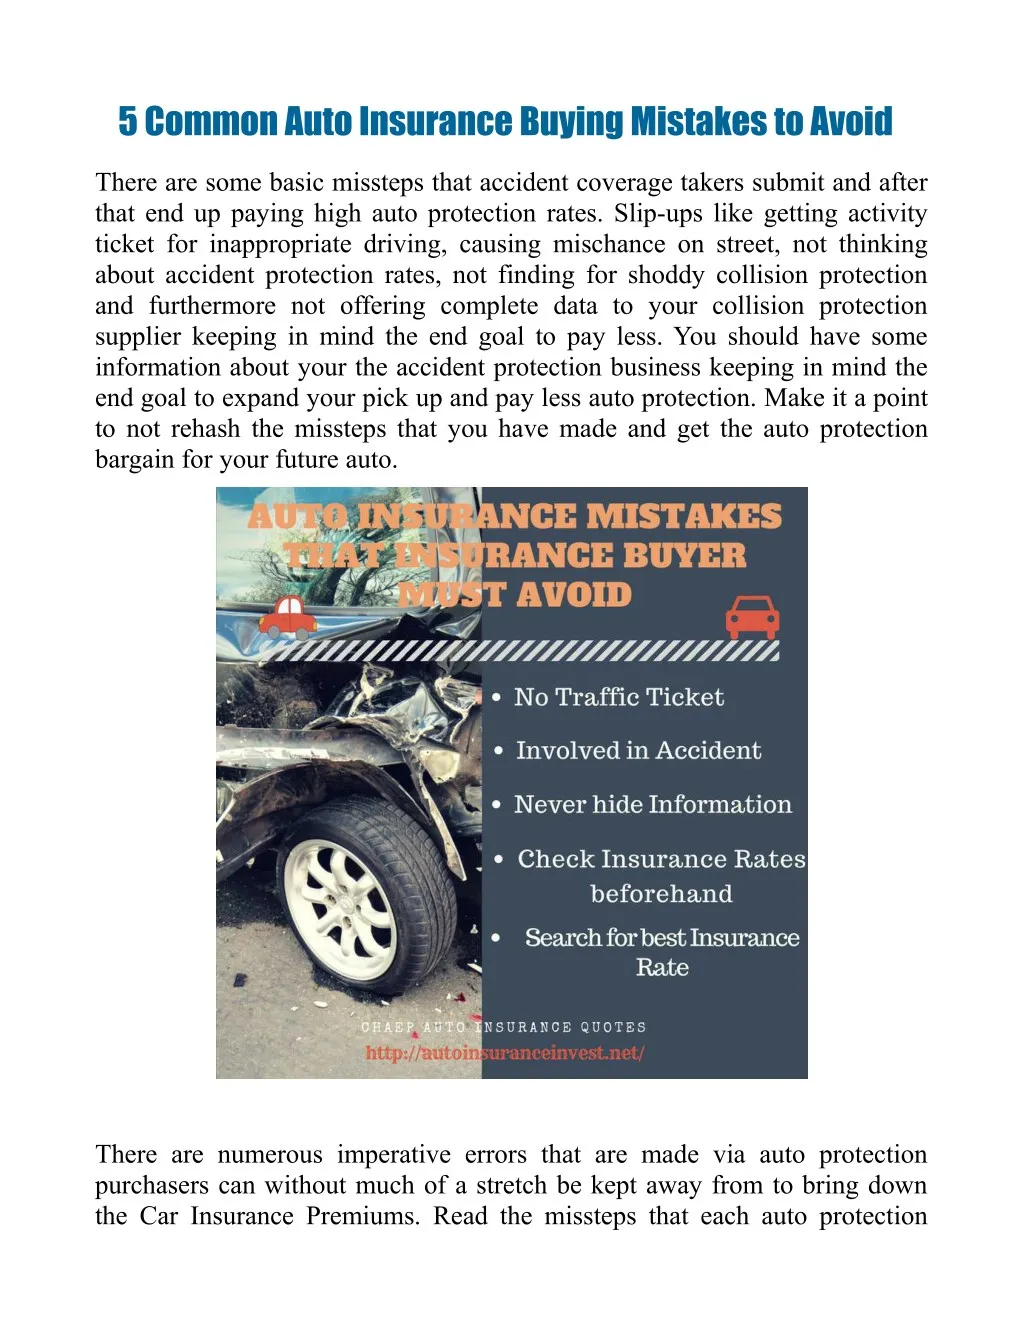 5 common auto insurance buying mistakes to avoid